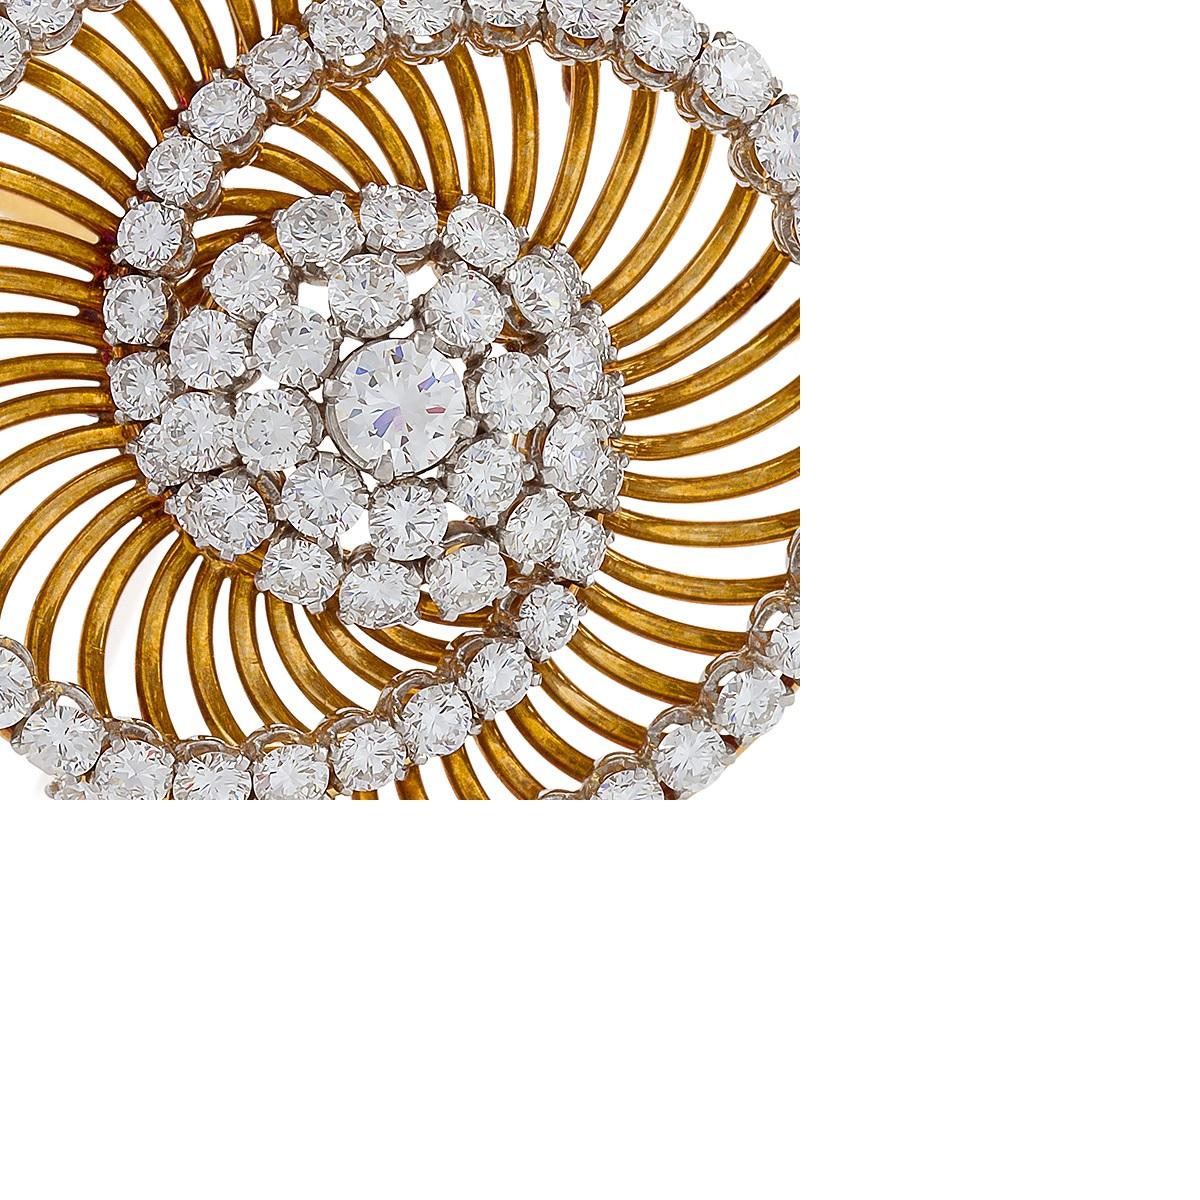 This intriguing brooch by Bulgari is set with six-and-a-half carats of round brilliant-cut diamonds, platinum set on a mount of yellow gold wire work. The dynamic, swirling form with intersecting arcs is designed as a pair of interlocking spirals